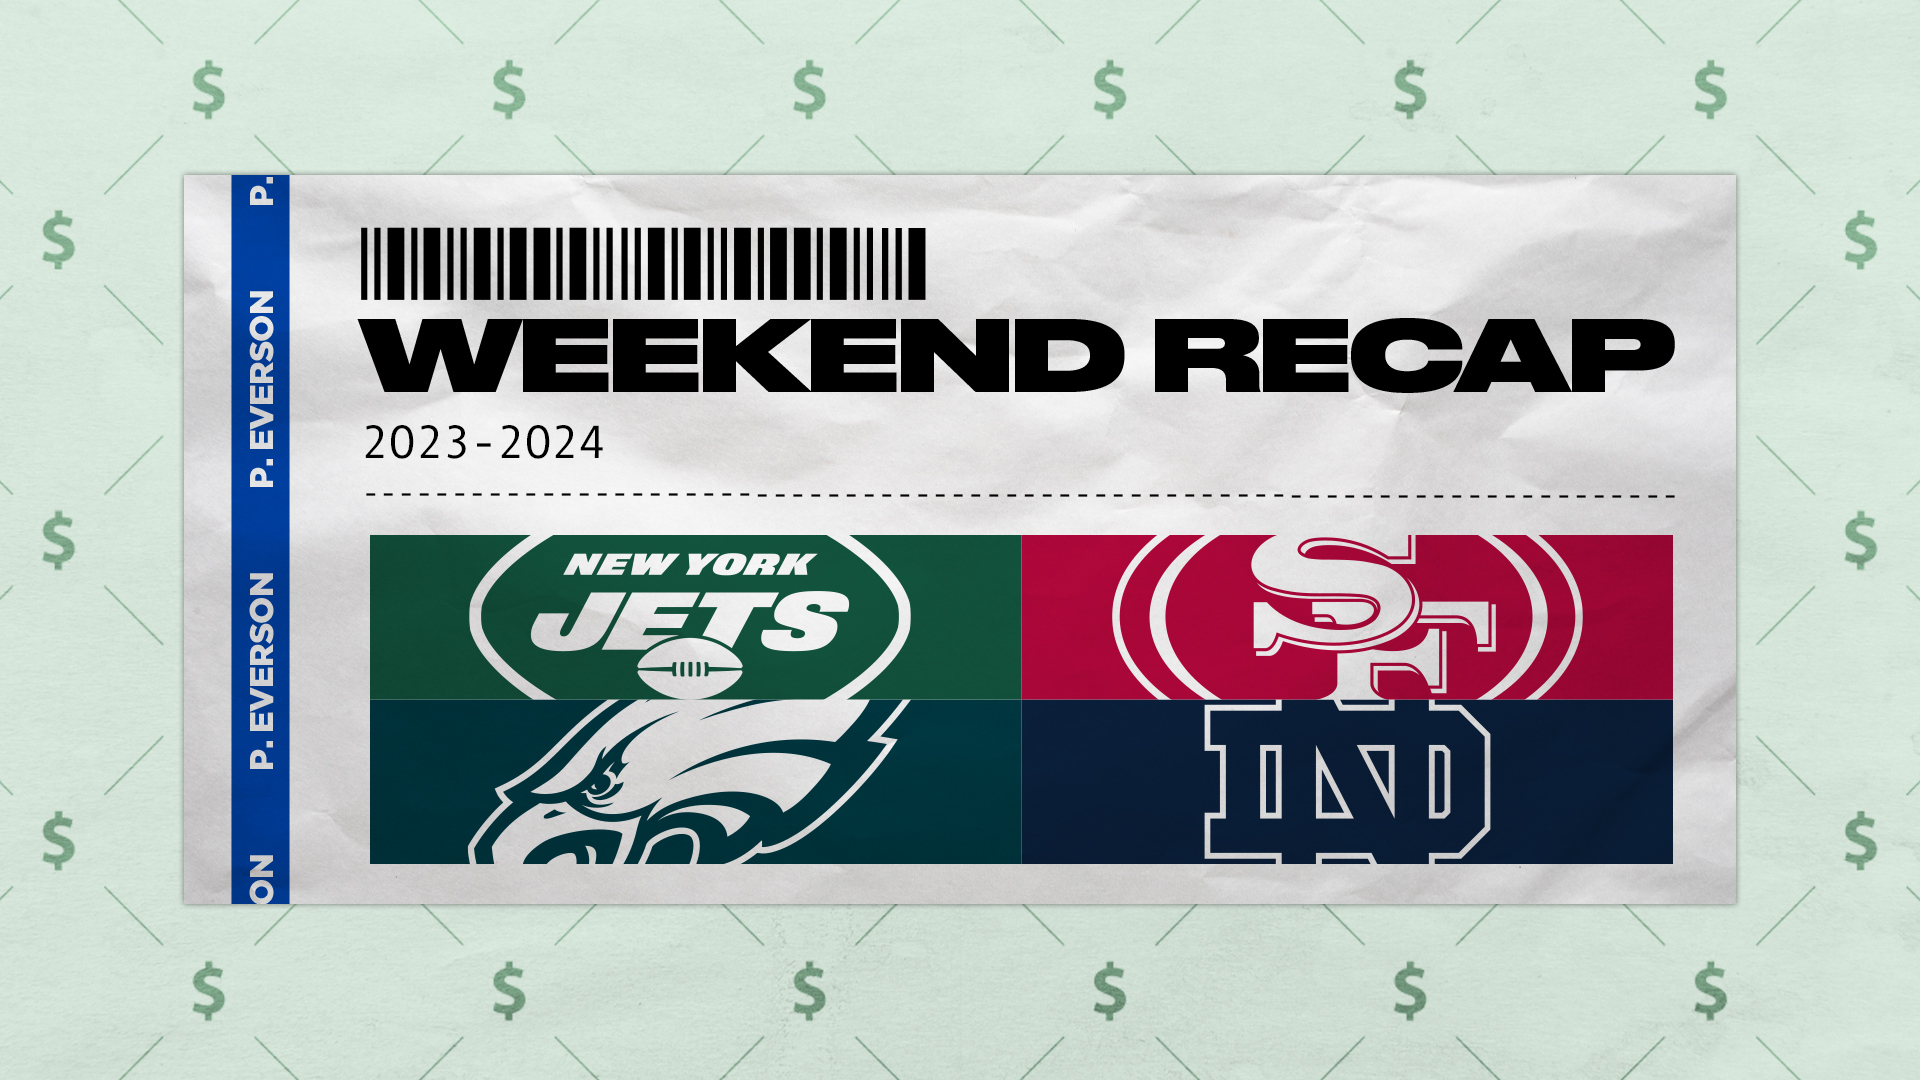 Sportsbooks win big with Niners, Eagles losses; bettor cashes in on Texans